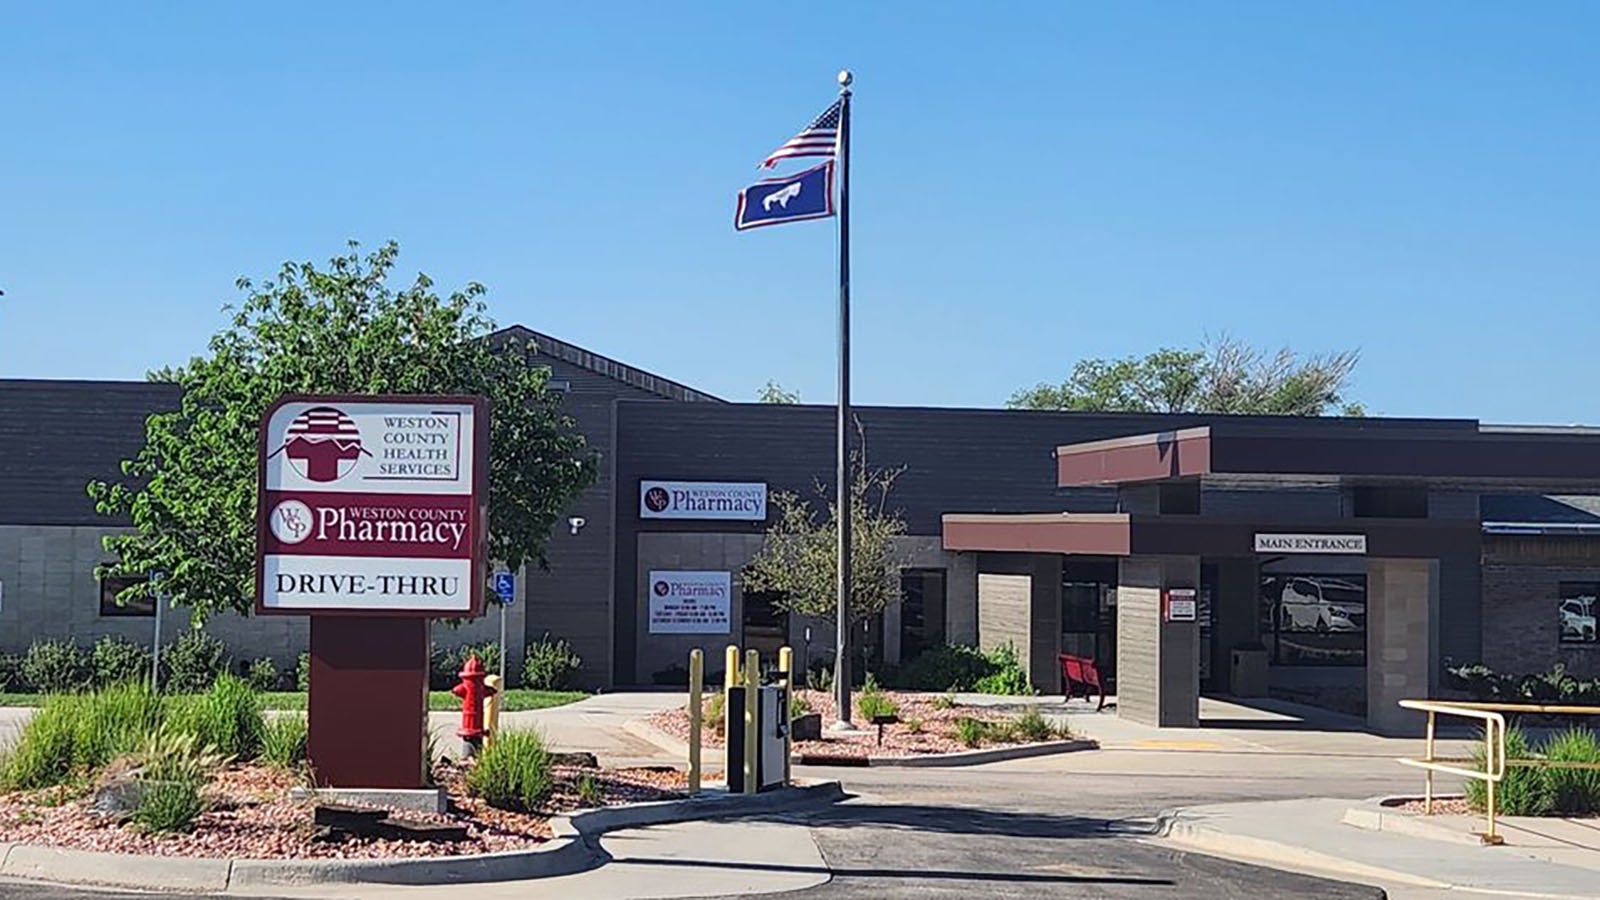 Weston County Health Services in Newcastle, Wyoming.